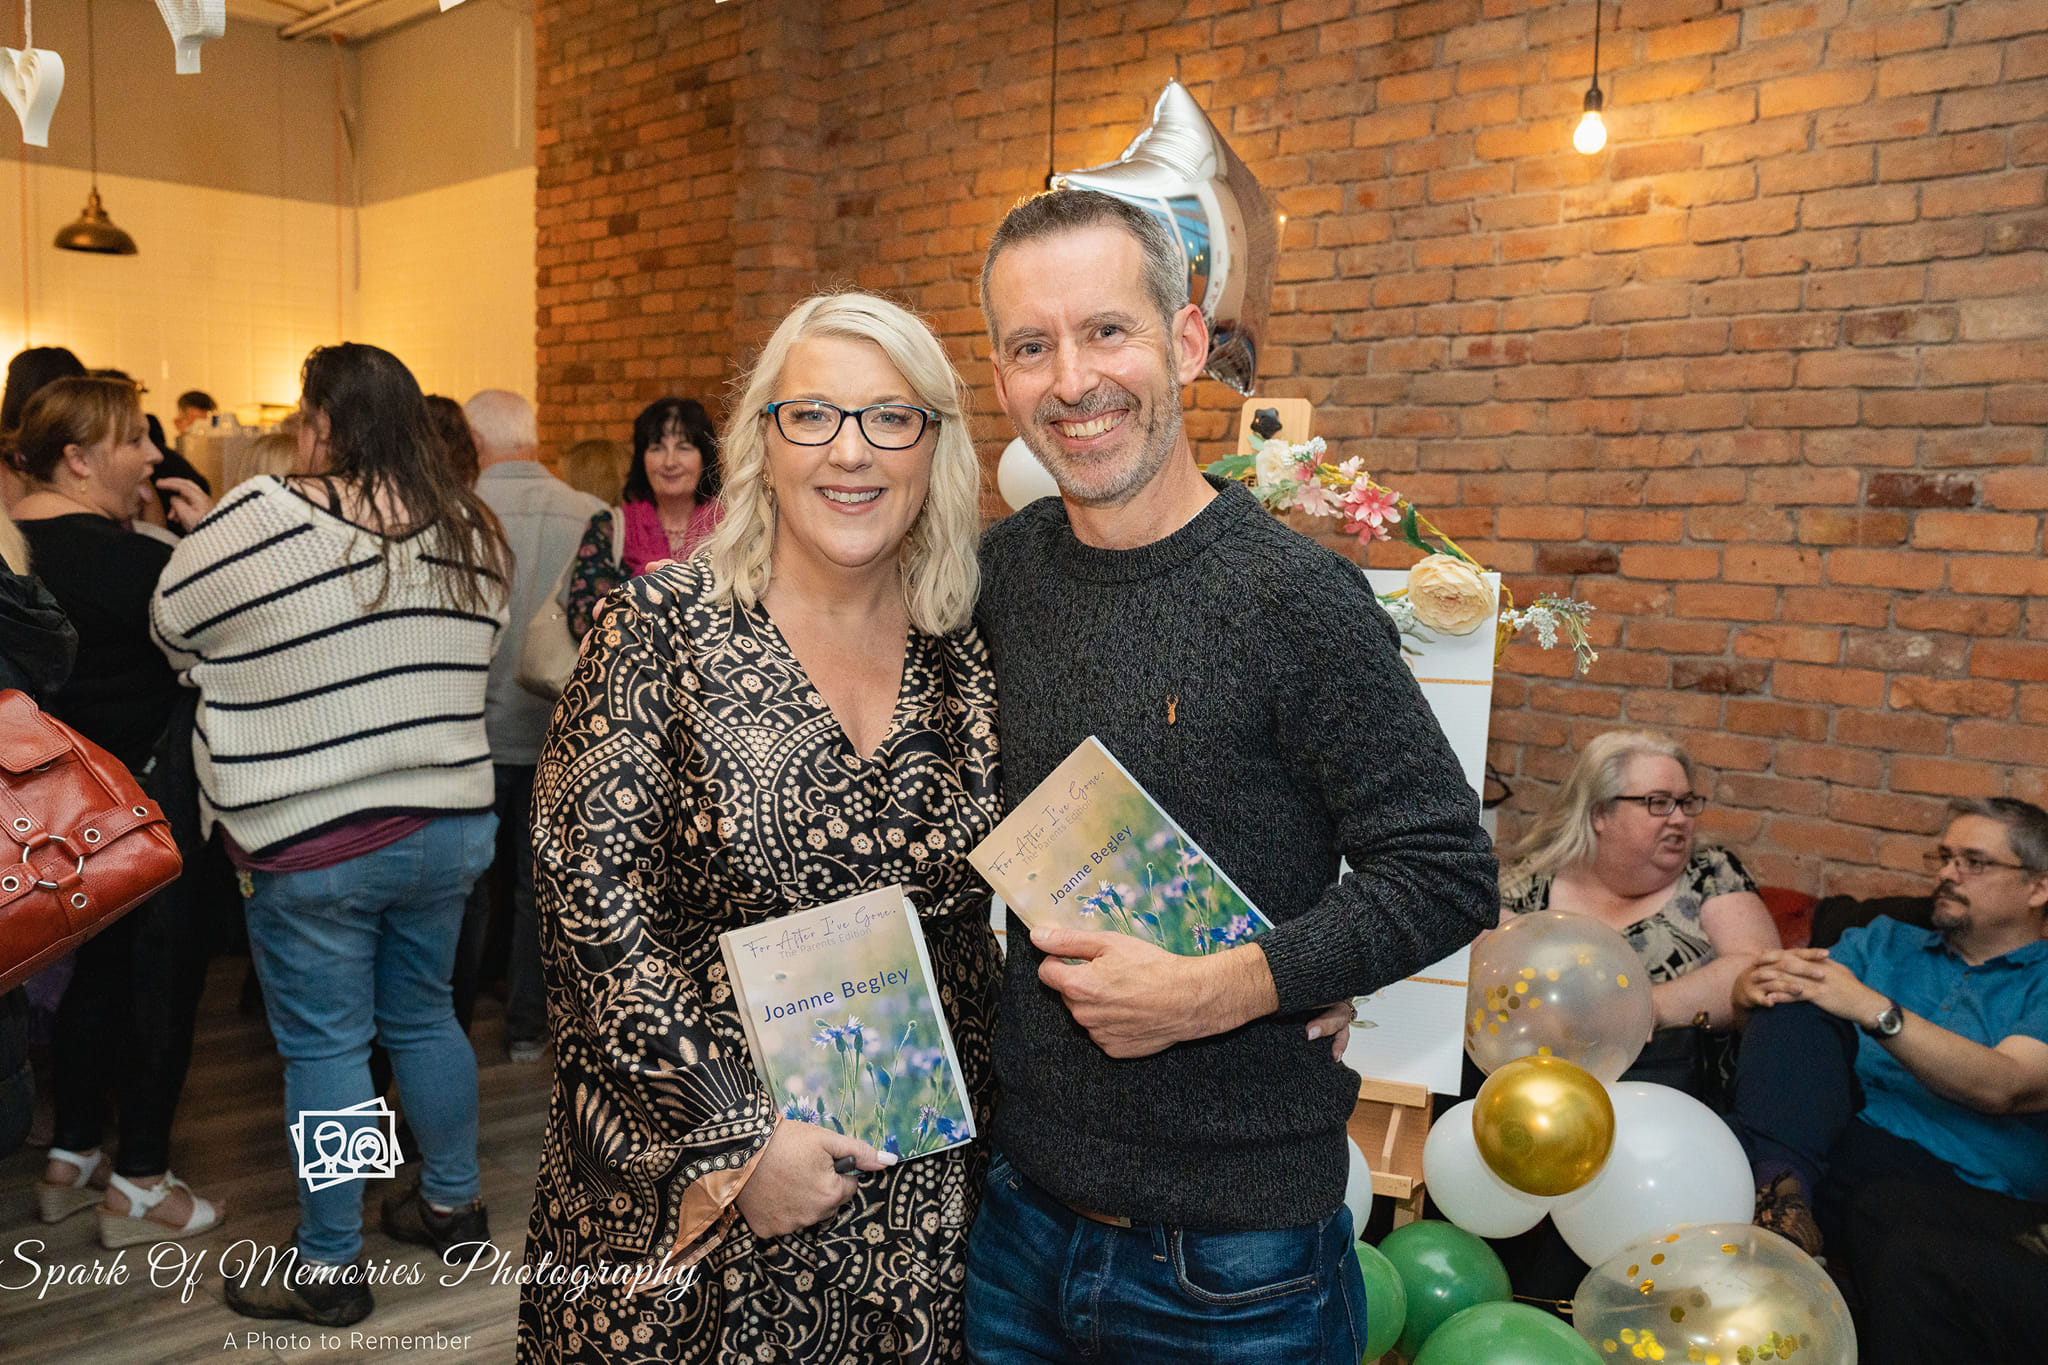 Joanne Begley was born in Limerick and has released her transformative self-help books, 'For After I've Gone'